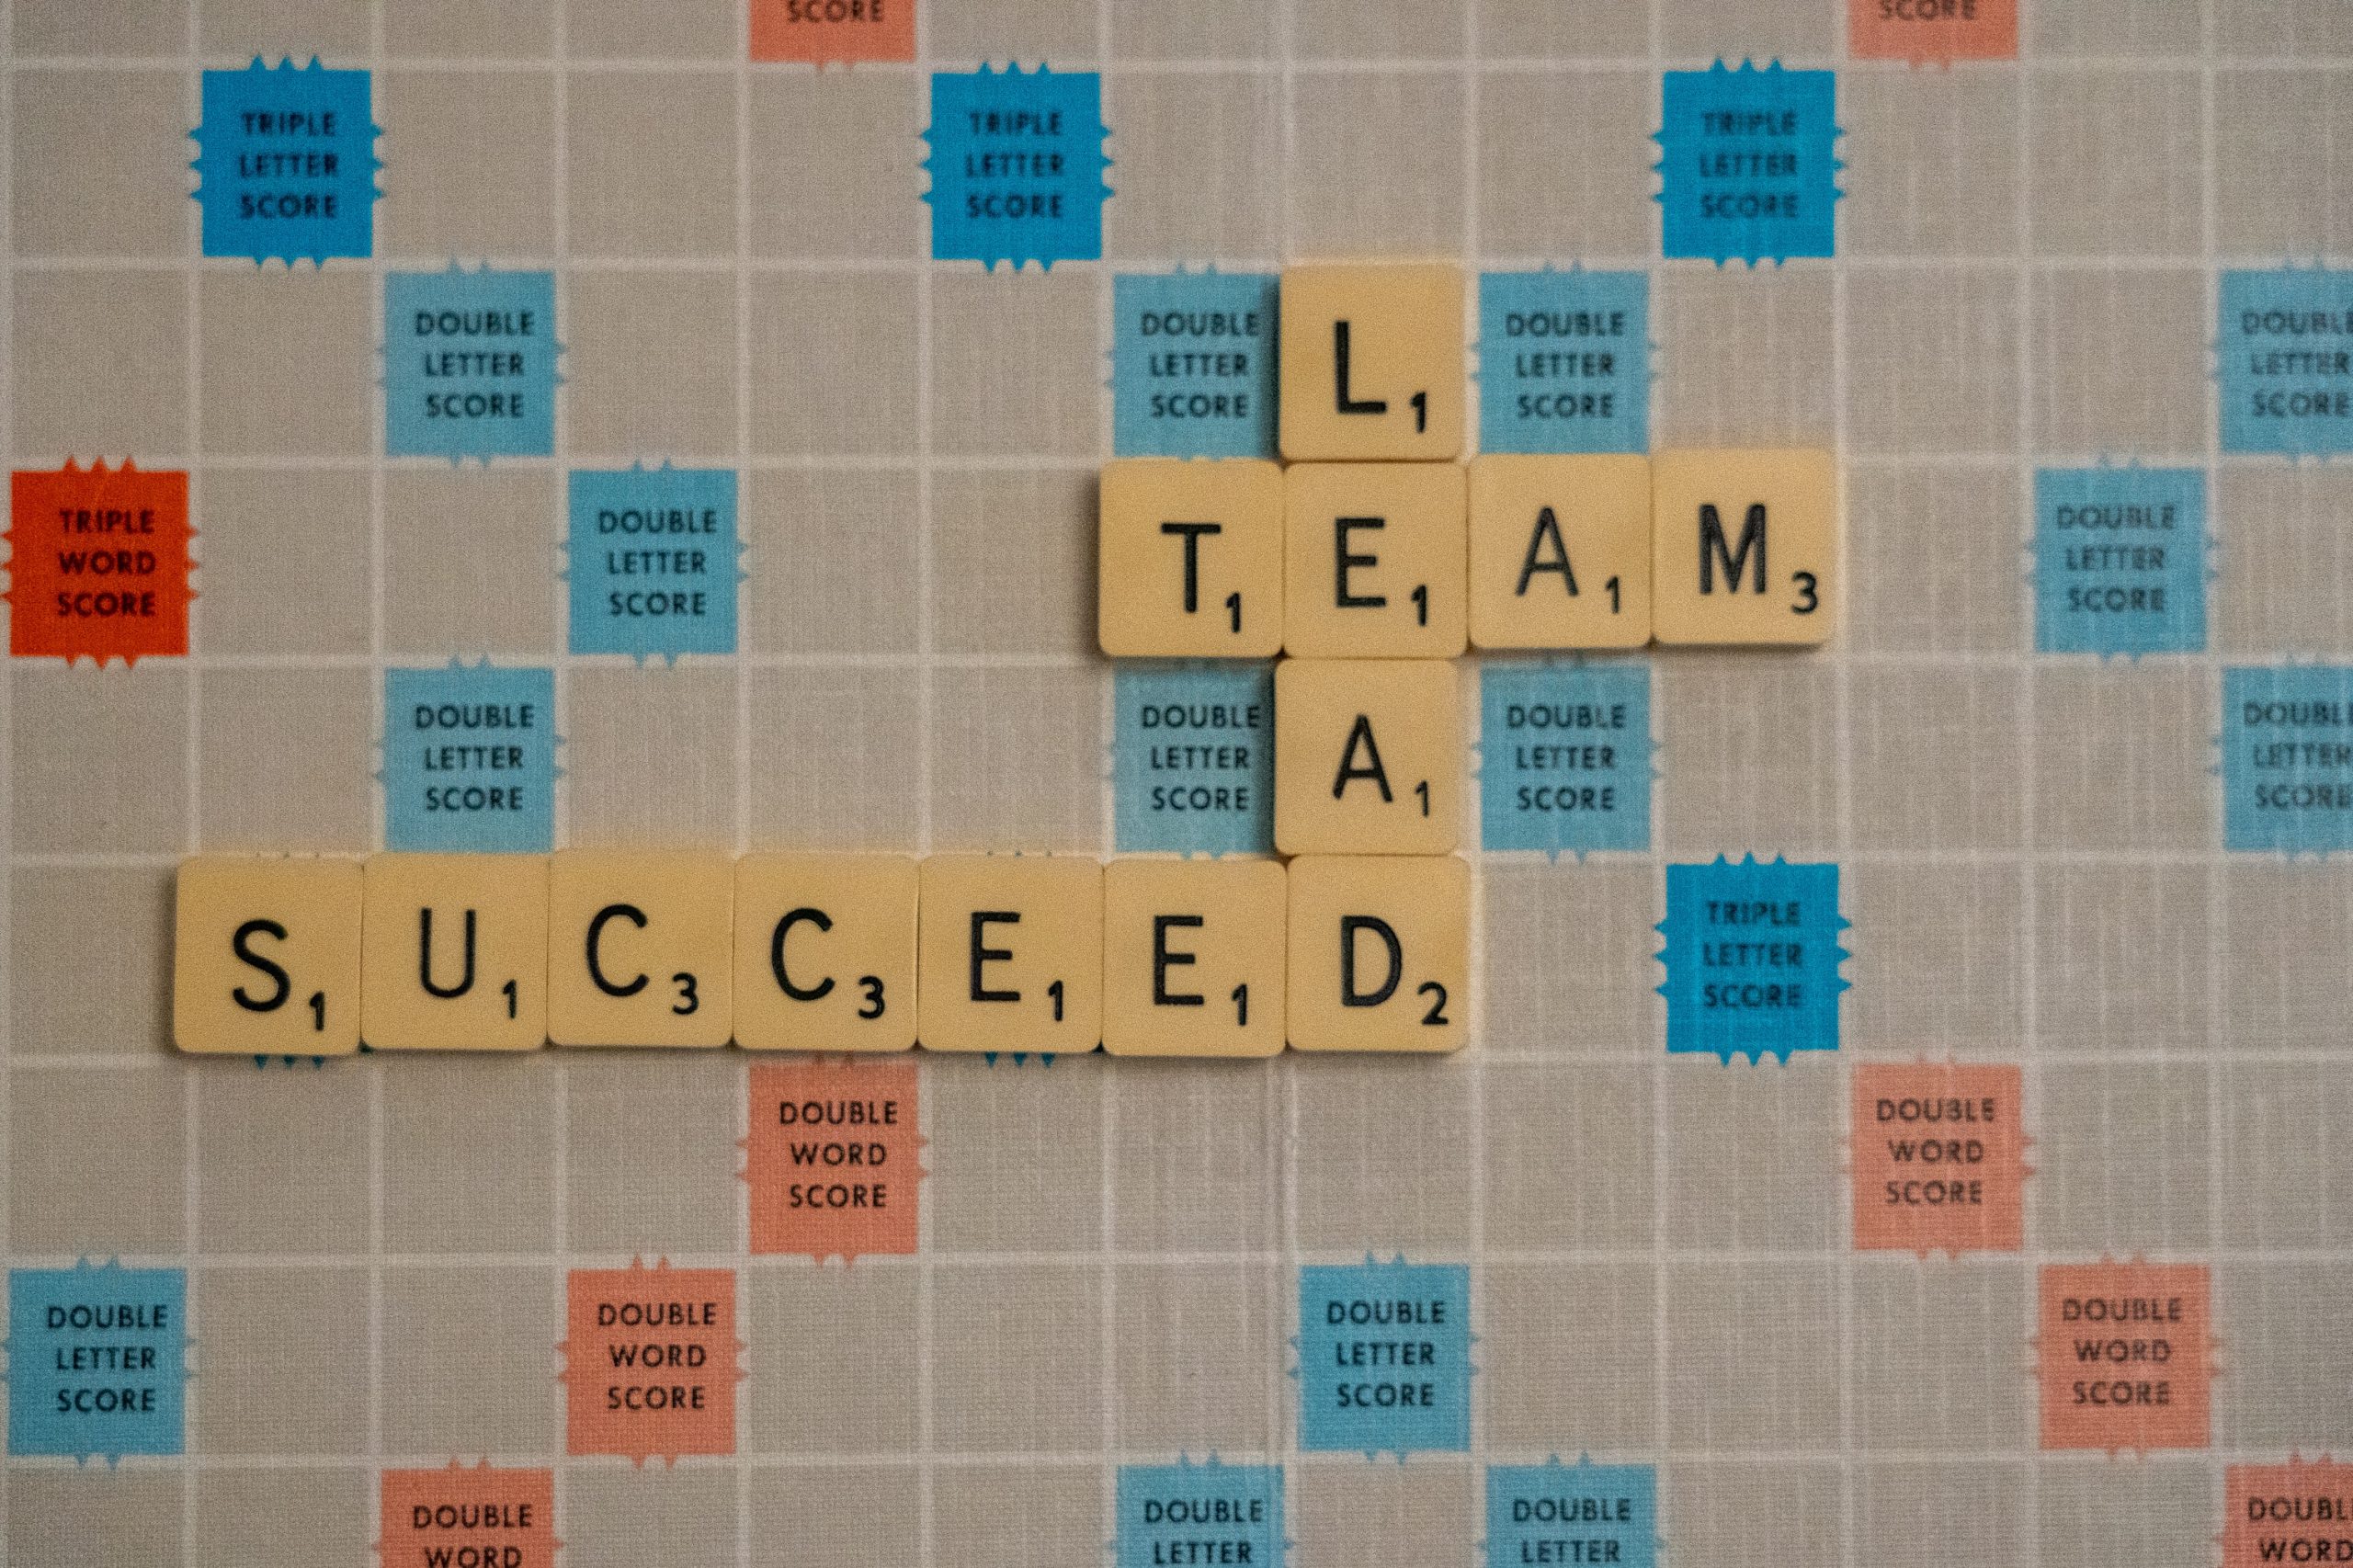 A Scrabble board with tiles spelling out three connected words: Lead, Team, and Succeed.
A Business Plan helps you succeed and lead, and prepare a team.